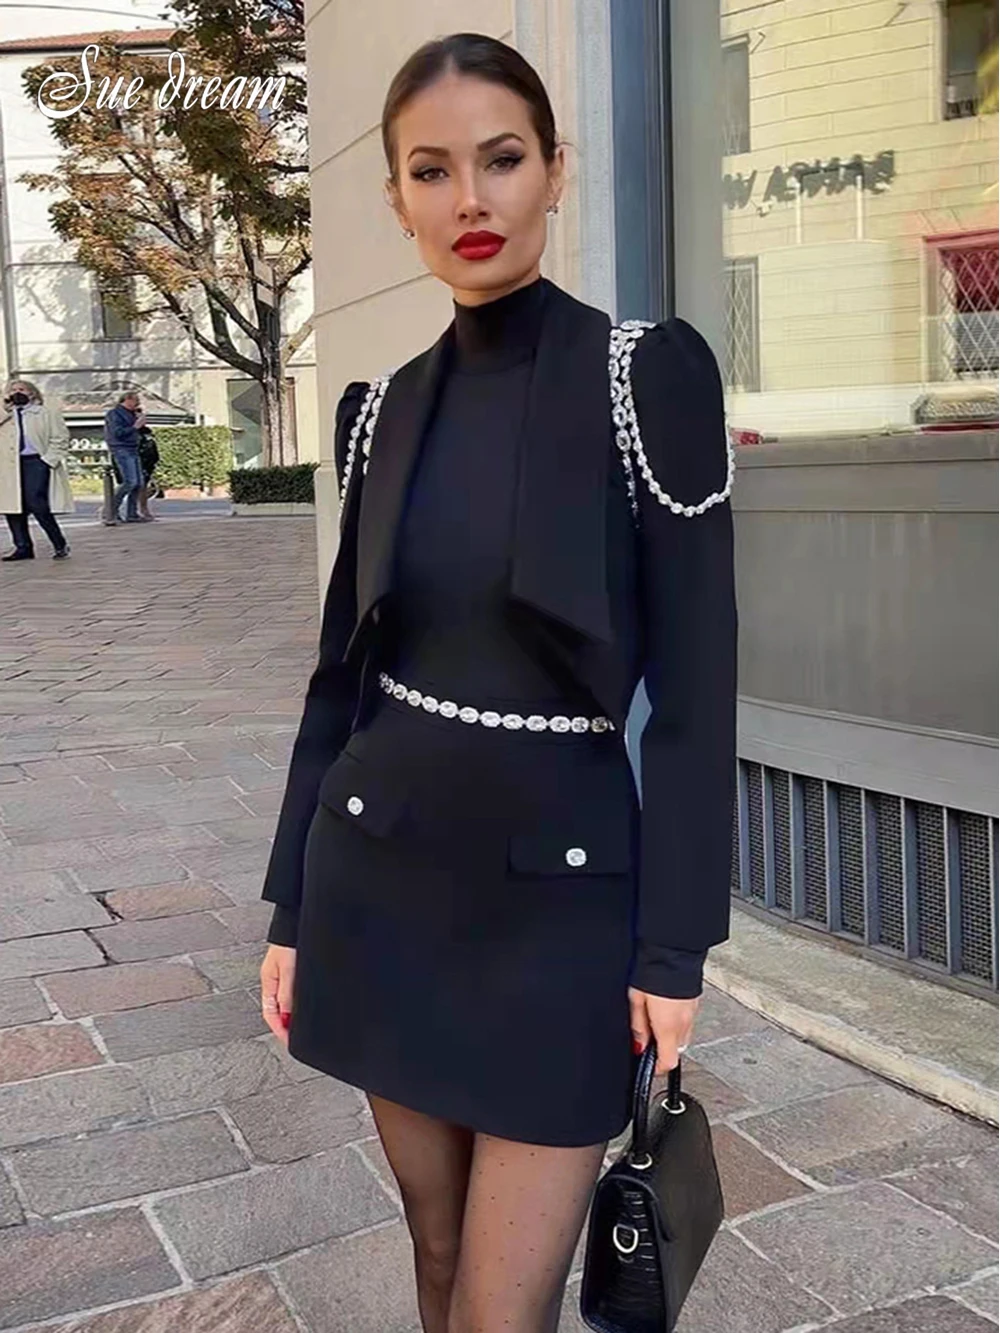 2021 Autumn And Winter New Long-Sleeved Slim Short Top Mini A-Line Skirt Hot Girl Suit Flashing Diamond Chain Short Suit Set